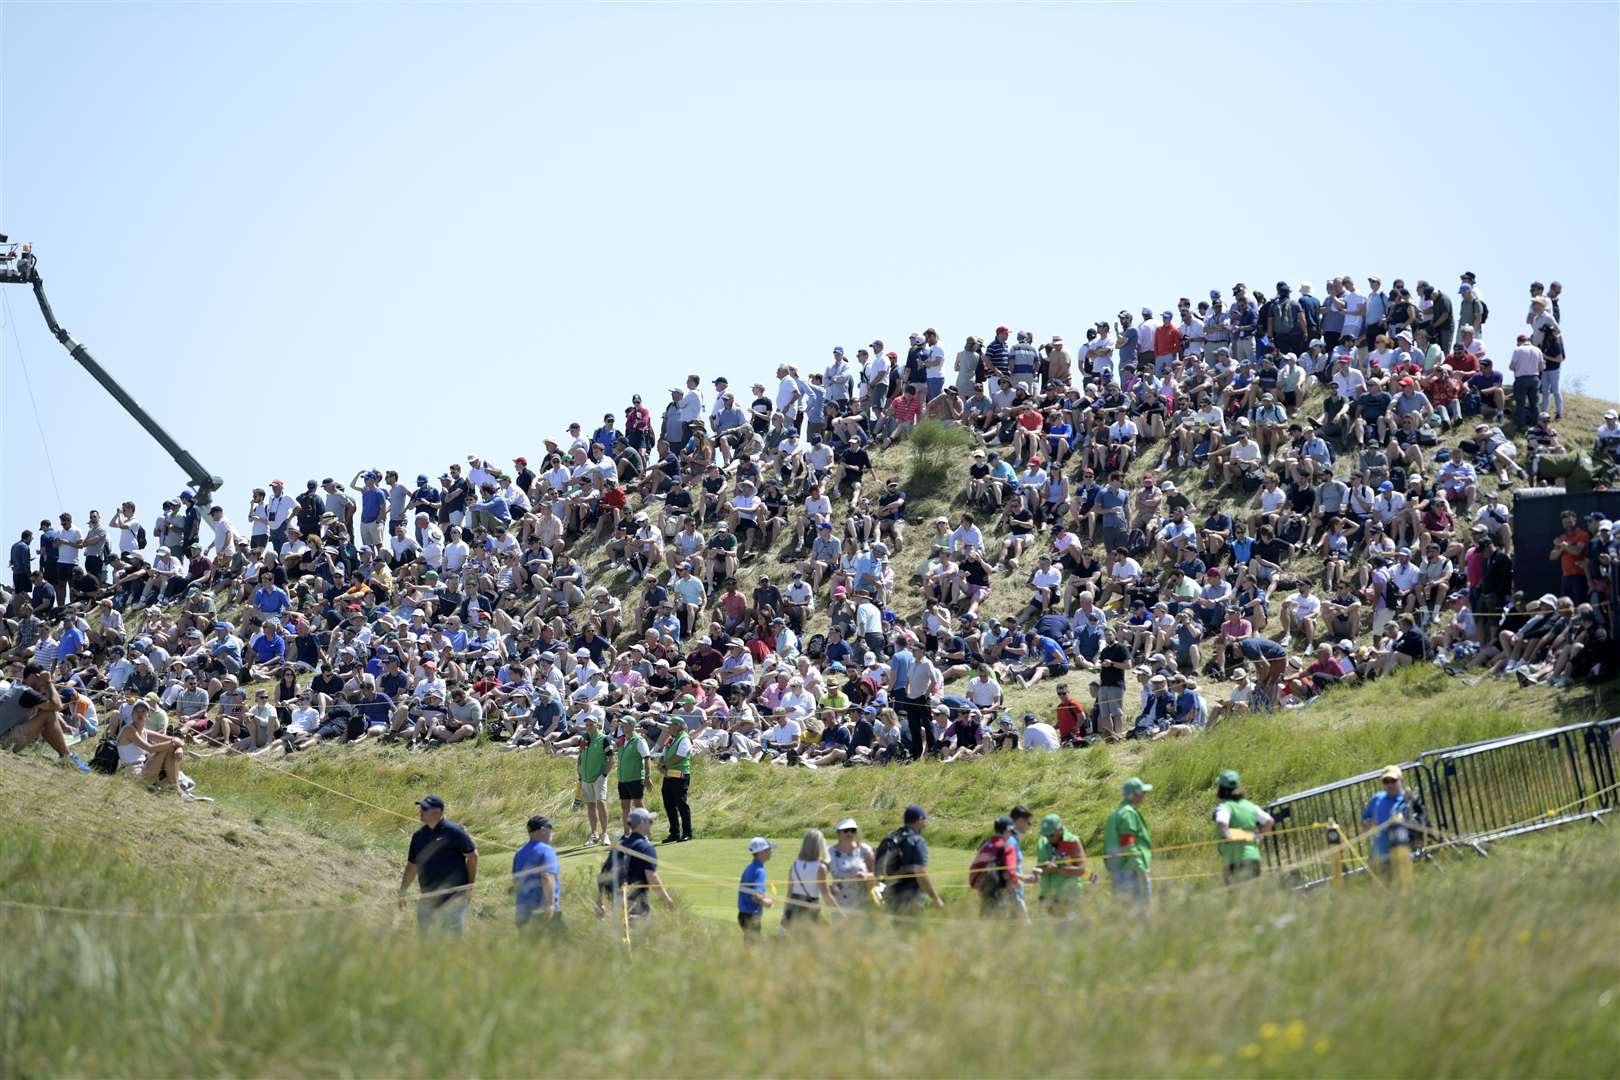 Up to 32,000 people attended The 149th Open in Sandwich each day. Picture: Barry Goodwin